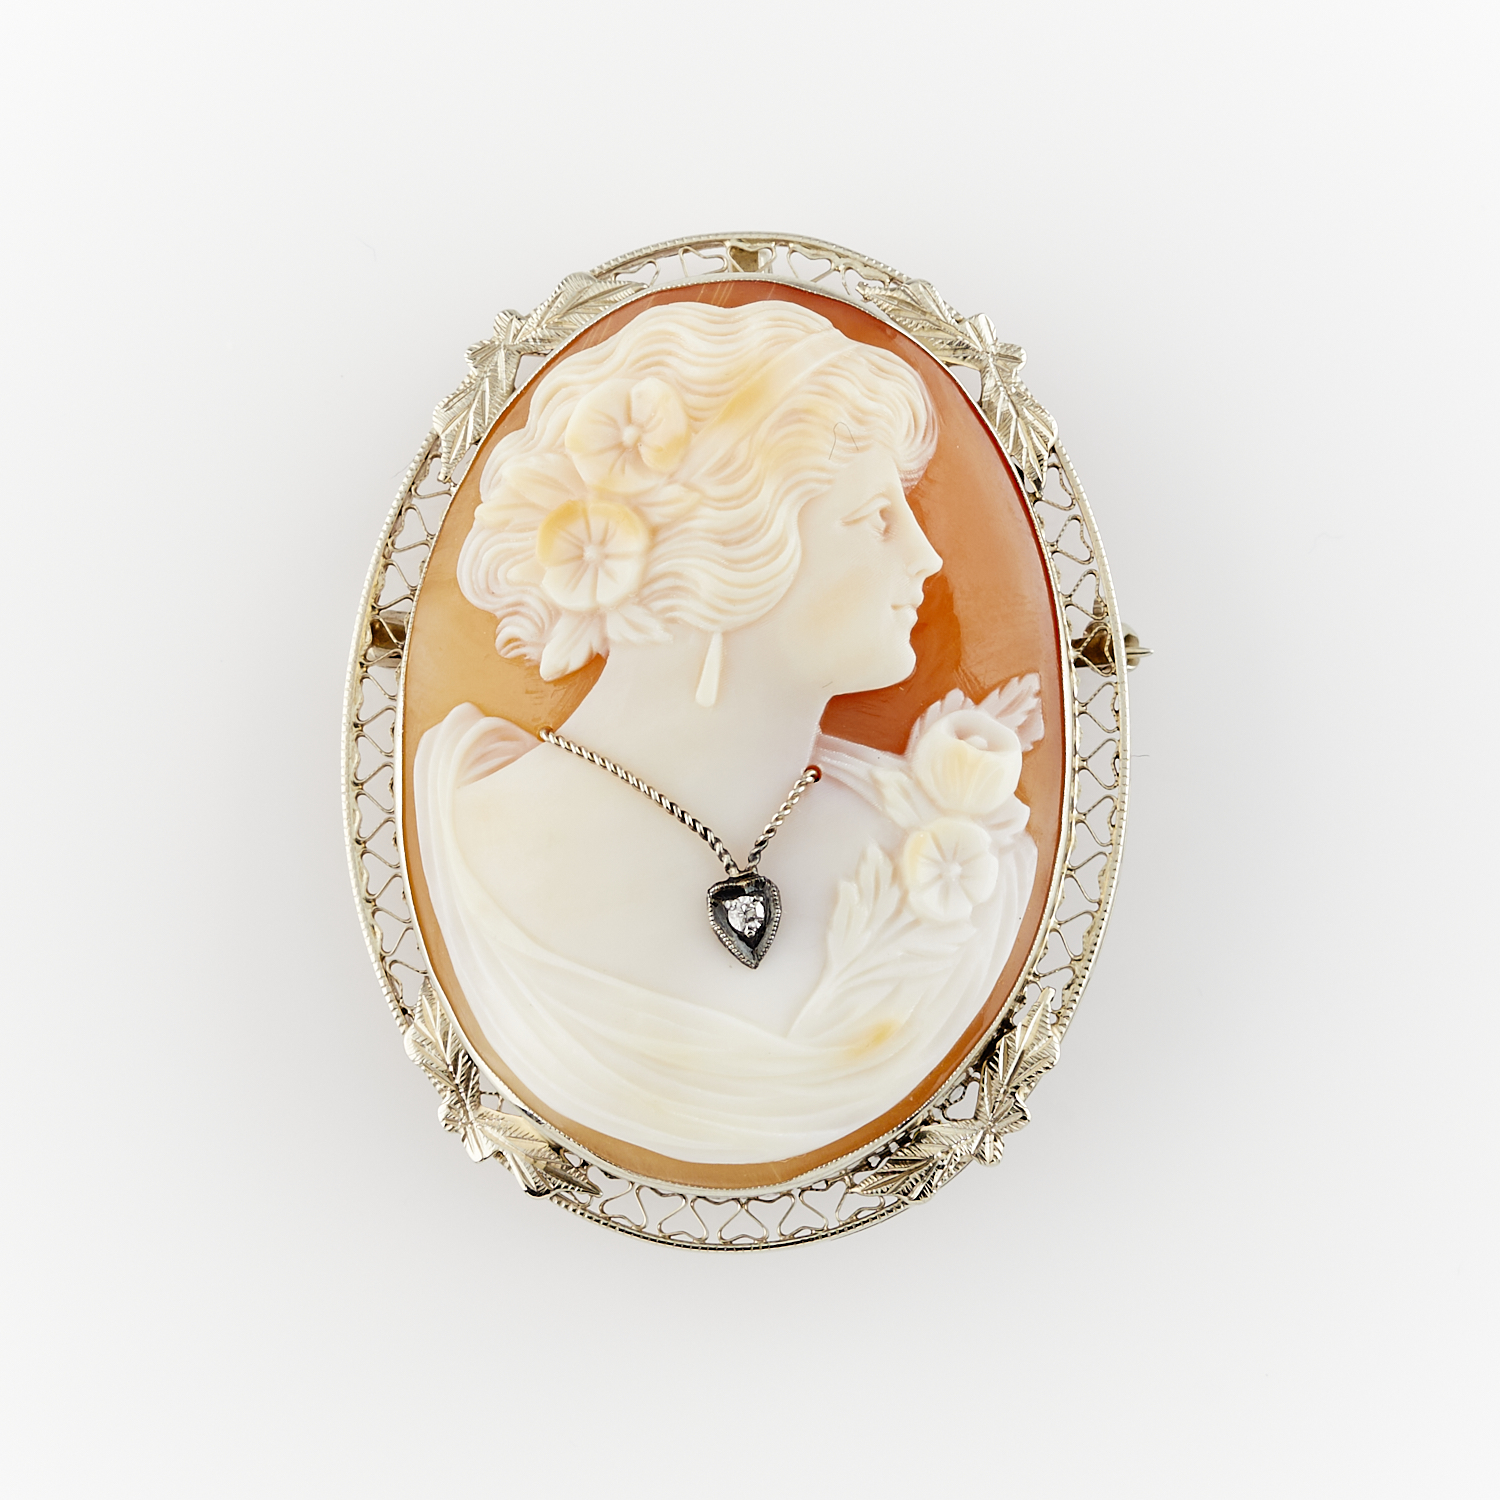 14k White Gold Cameo Habille Brooch with Diamond